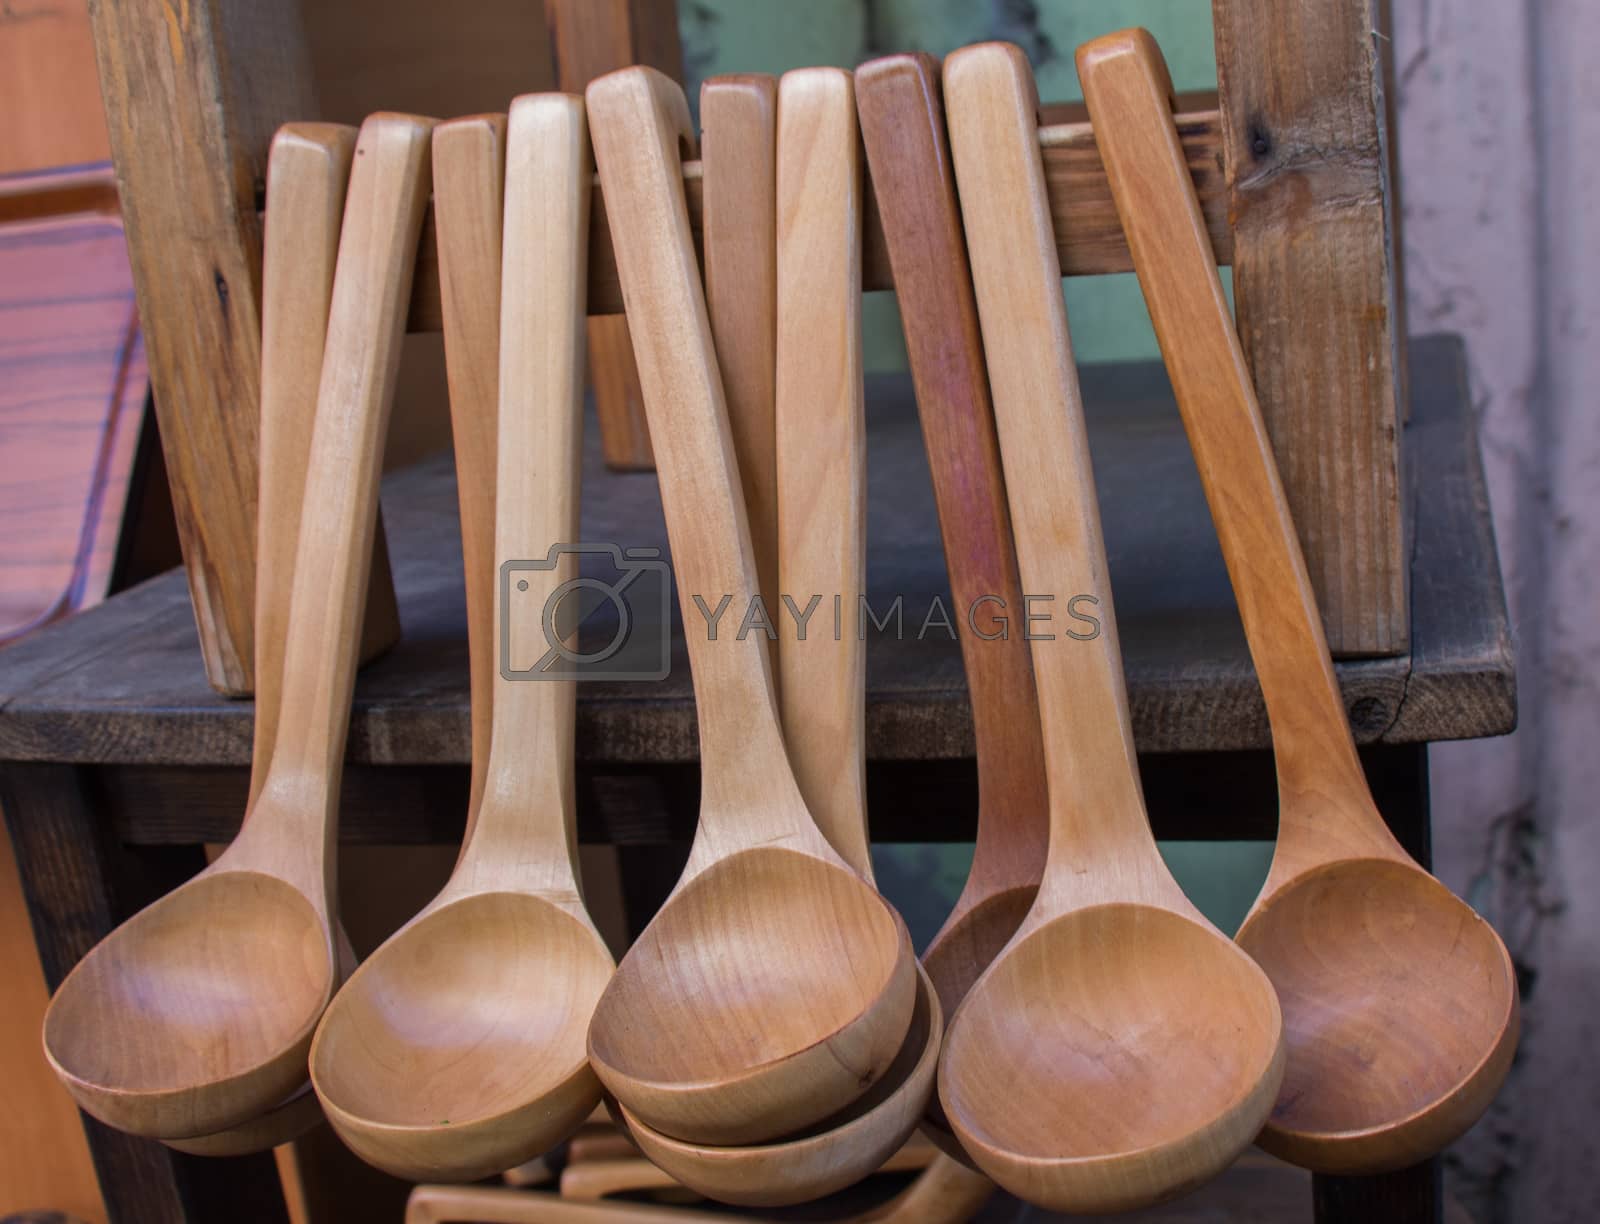 Royalty free image of soup spoon or tablespoon made of wood by berkay